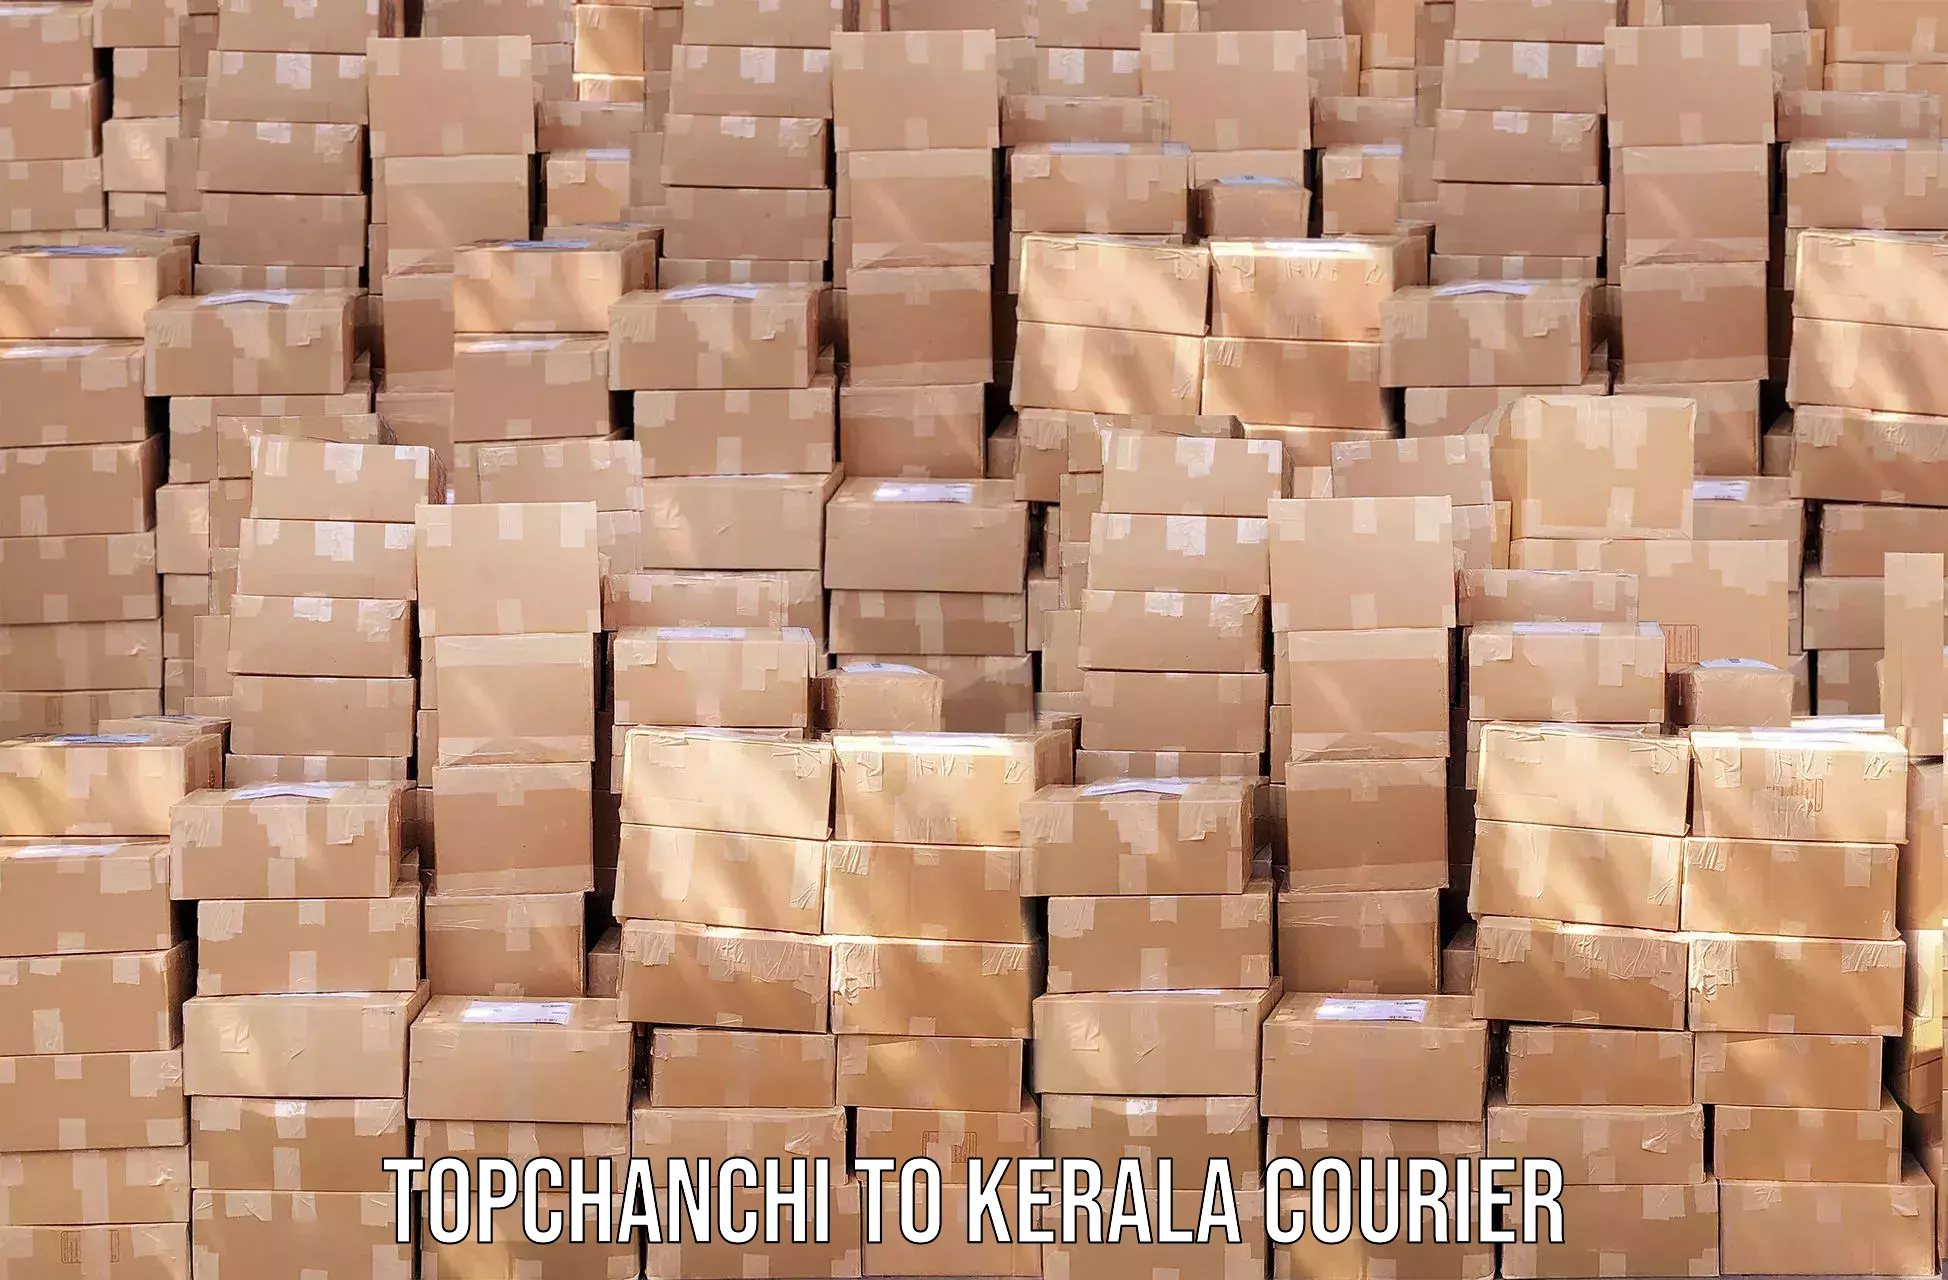 Customizable delivery plans in Topchanchi to Kazhakkoottam